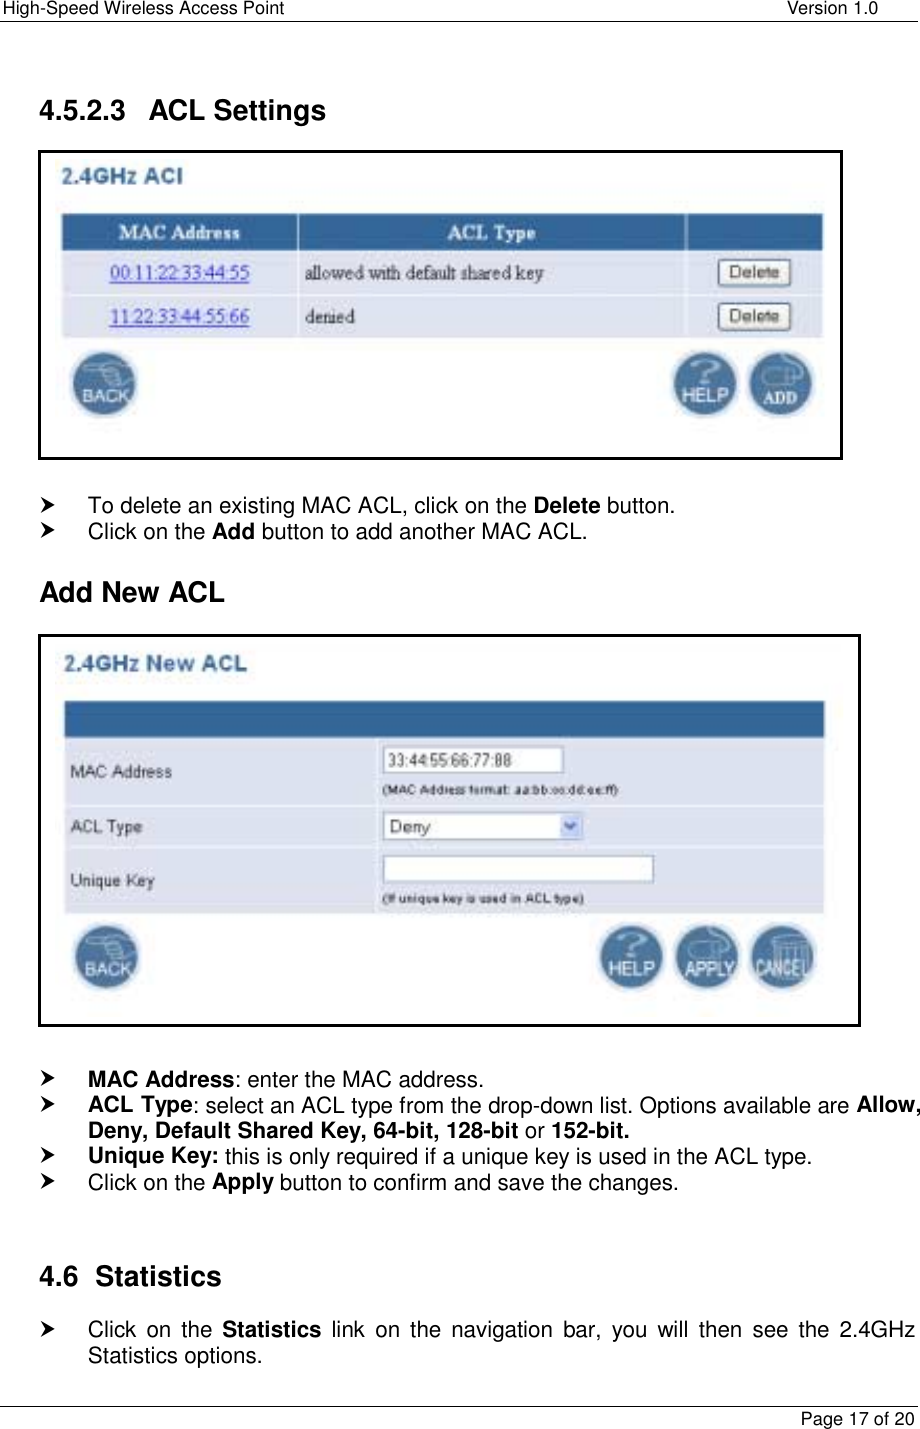 High-Speed Wireless Access Point    Version 1.0  Page 17 of 20  4.5.2.3 ACL Settings            h To delete an existing MAC ACL, click on the Delete button.  h Click on the Add button to add another MAC ACL.    Add New ACL               h MAC Address: enter the MAC address. h ACL Type: select an ACL type from the drop-down list. Options available are Allow, Deny, Default Shared Key, 64-bit, 128-bit or 152-bit. h Unique Key: this is only required if a unique key is used in the ACL type.  h Click on the Apply button to confirm and save the changes.   4.6 Statistics h Click on the Statistics link on the navigation bar, you will then see the 2.4GHz Statistics options.    